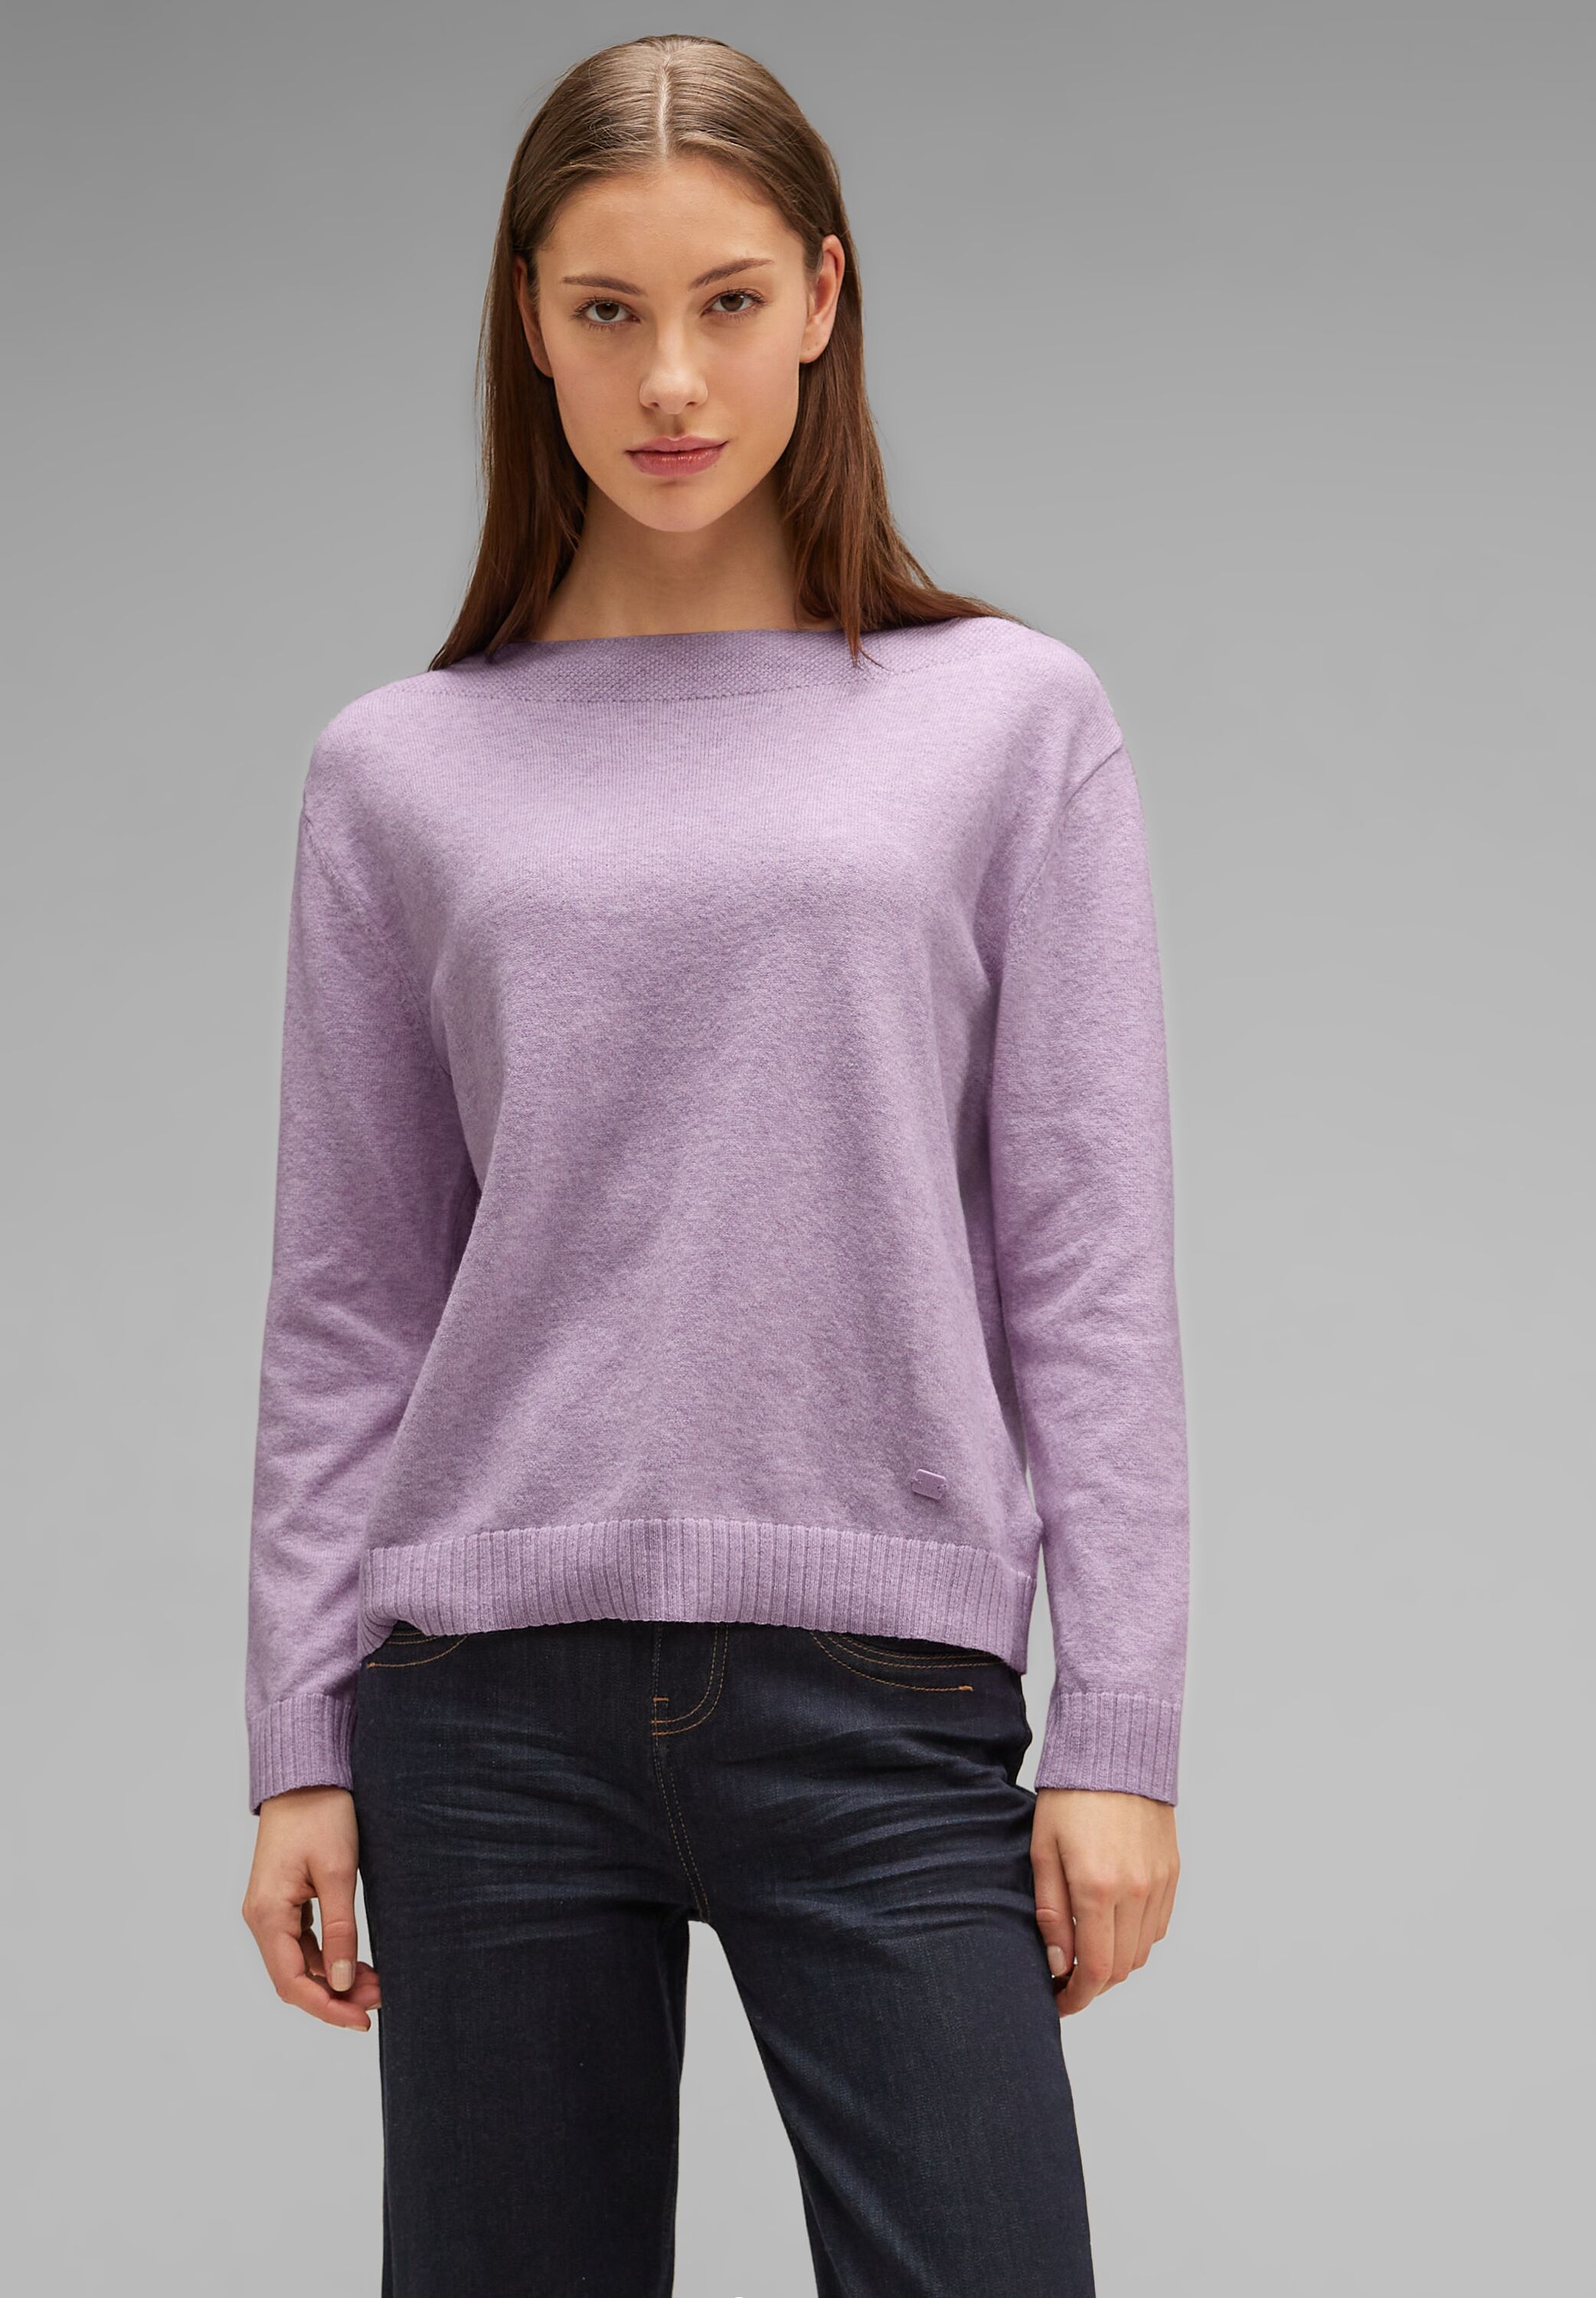 Street One - Pullover in Melange reduziert im Mode Soft Lilac Pure CONCEPT SALE A302414-15290